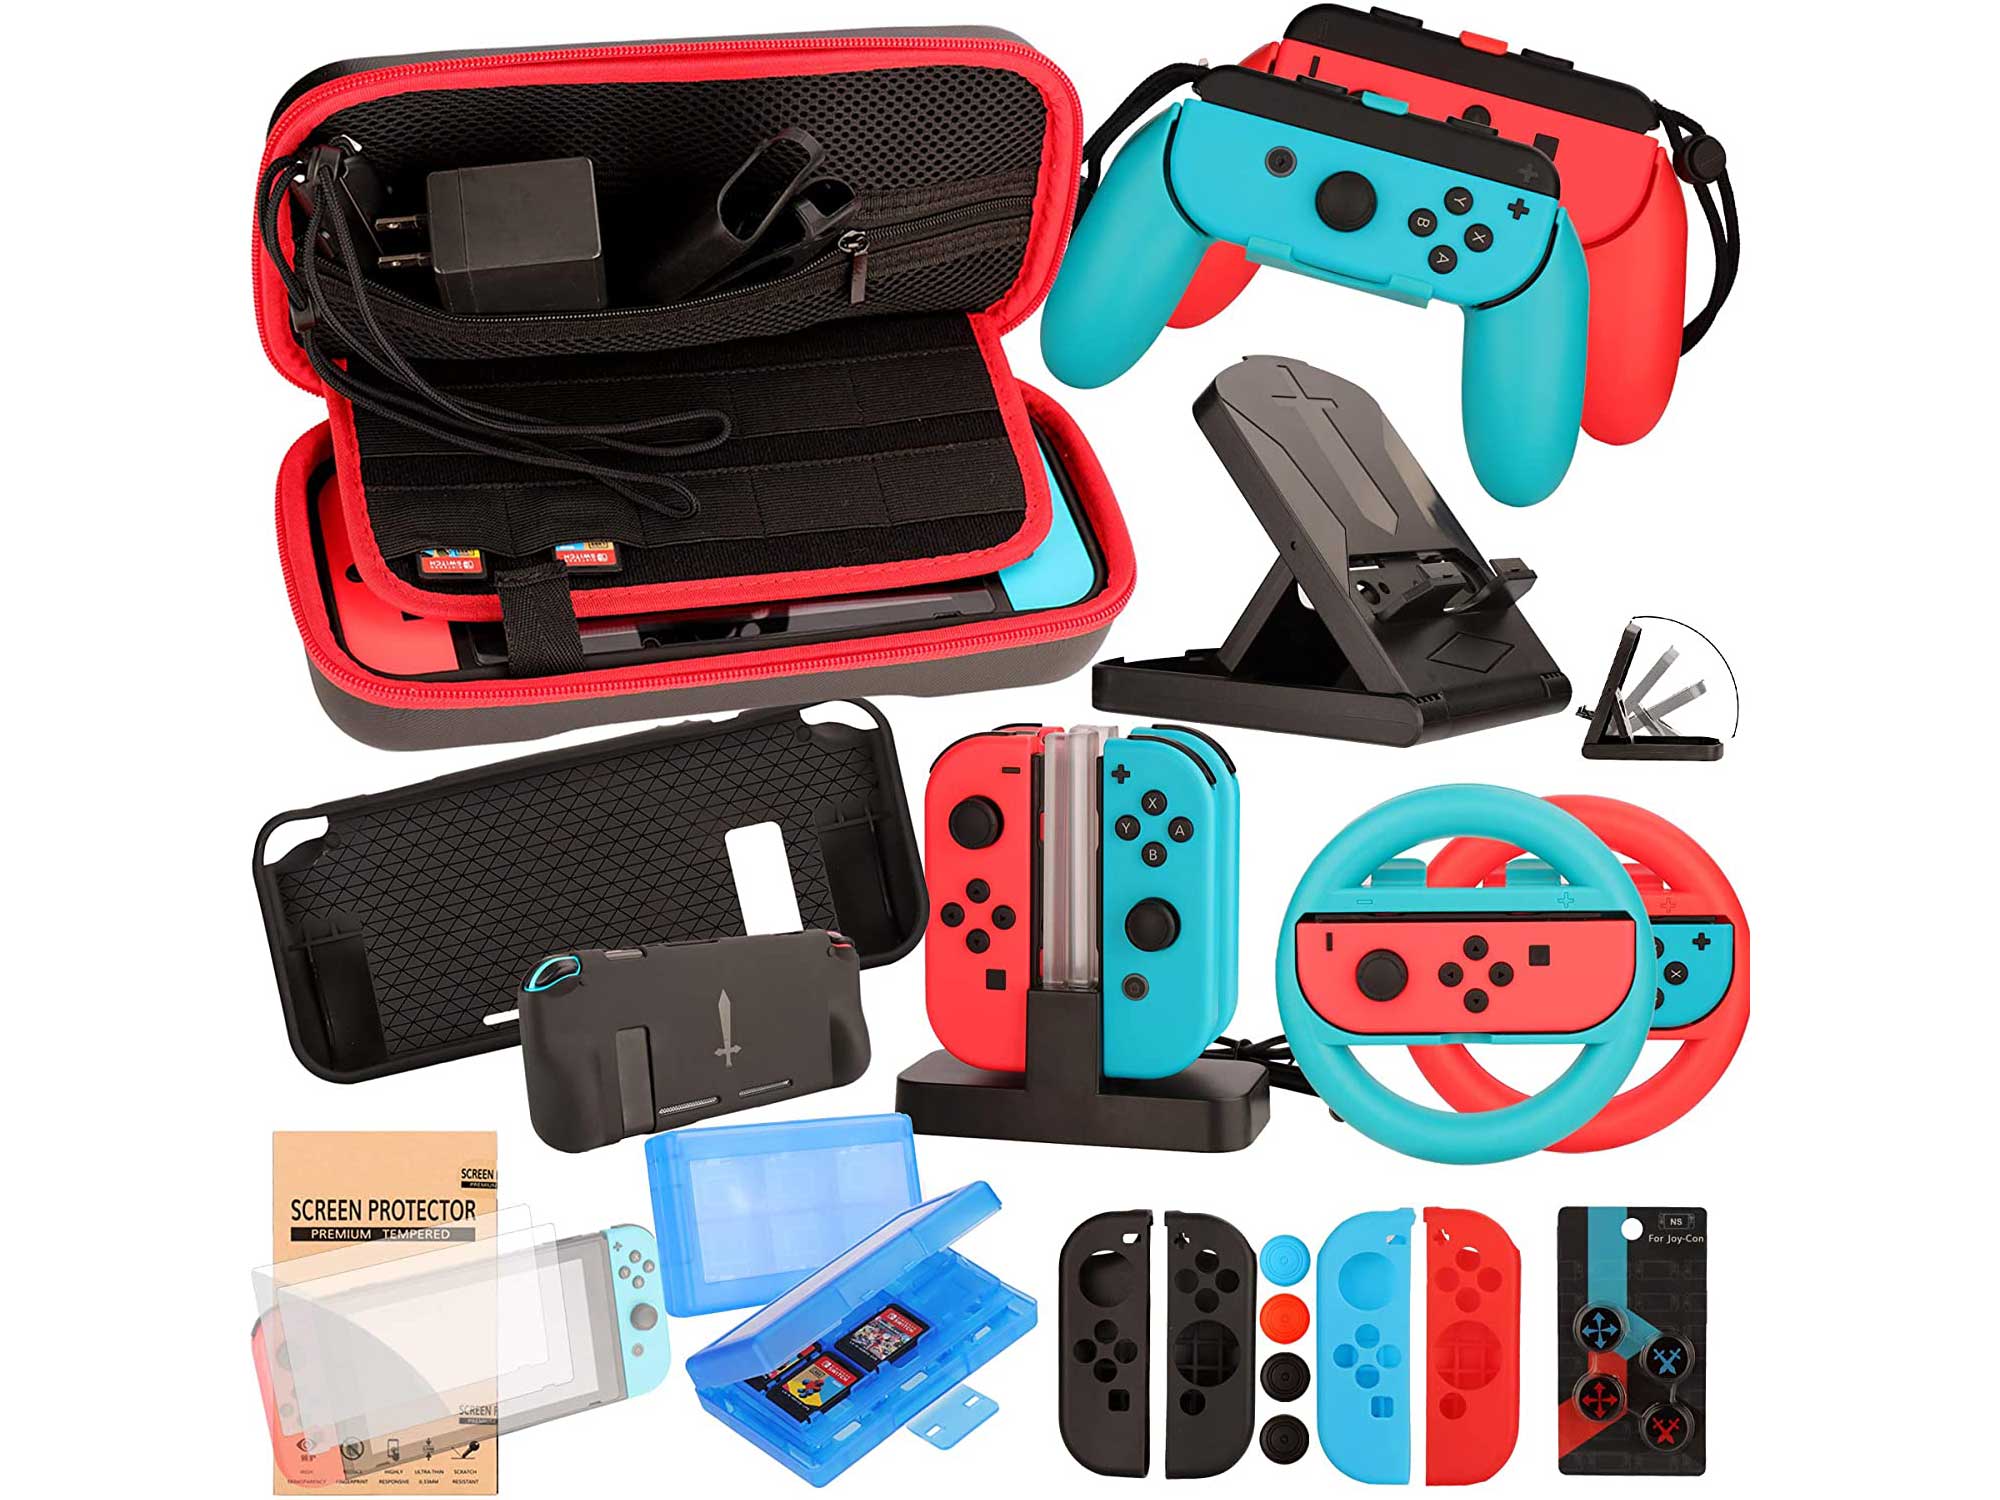 Eovola Accessories Kit for Nintendo Switch